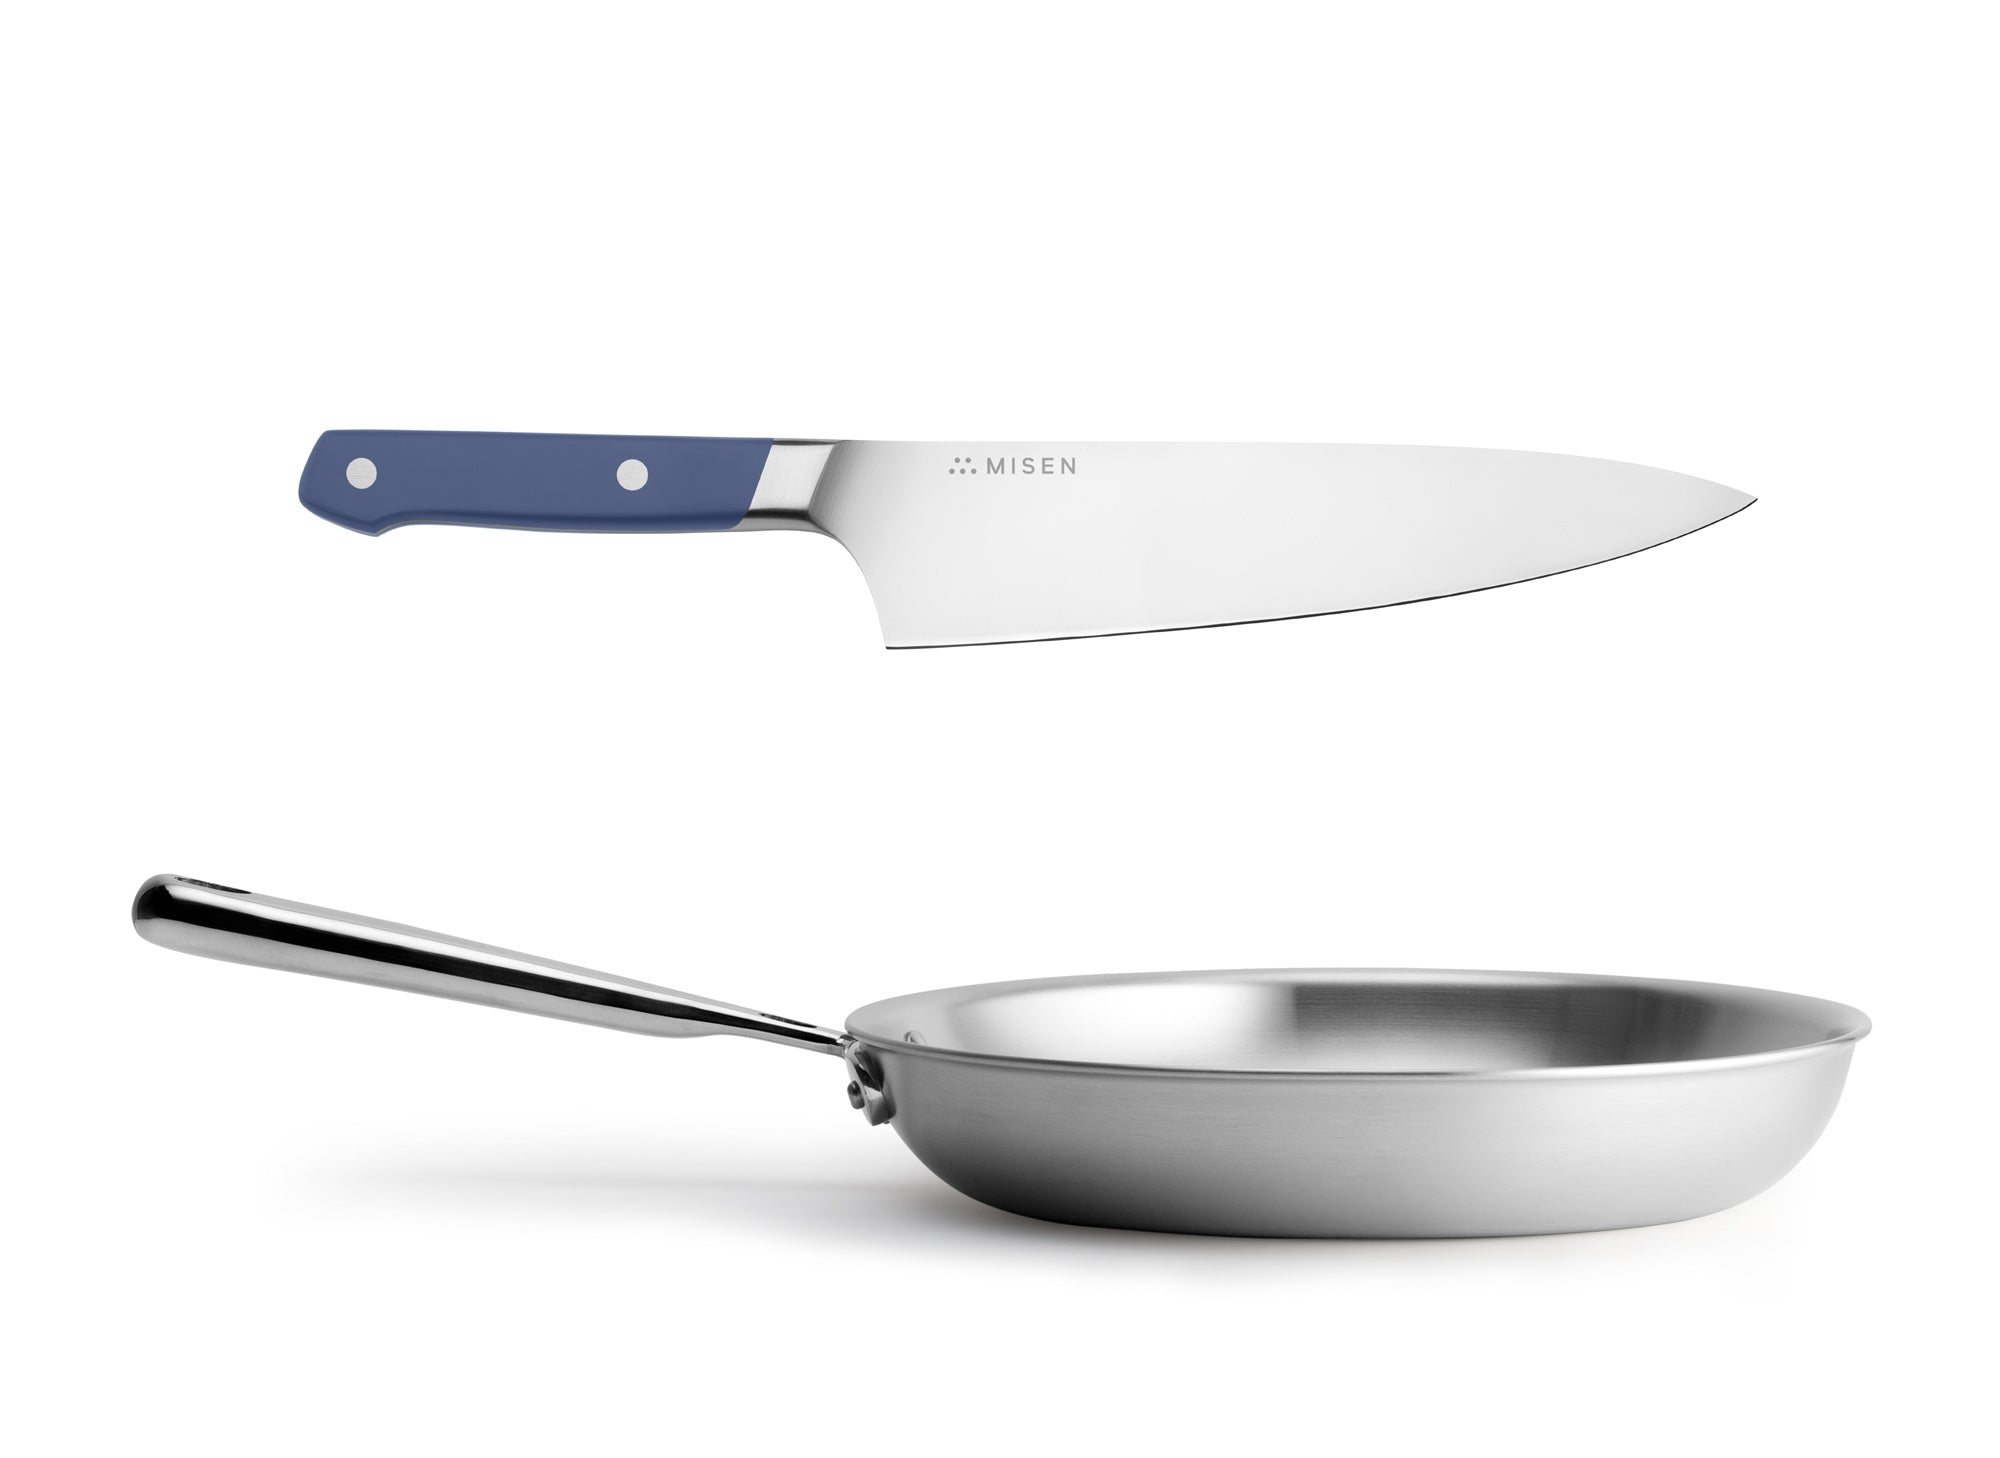 The blue Misen Chef's Knife & 10 inch Skillet Bundle is an essential workhorse in any kitchen.